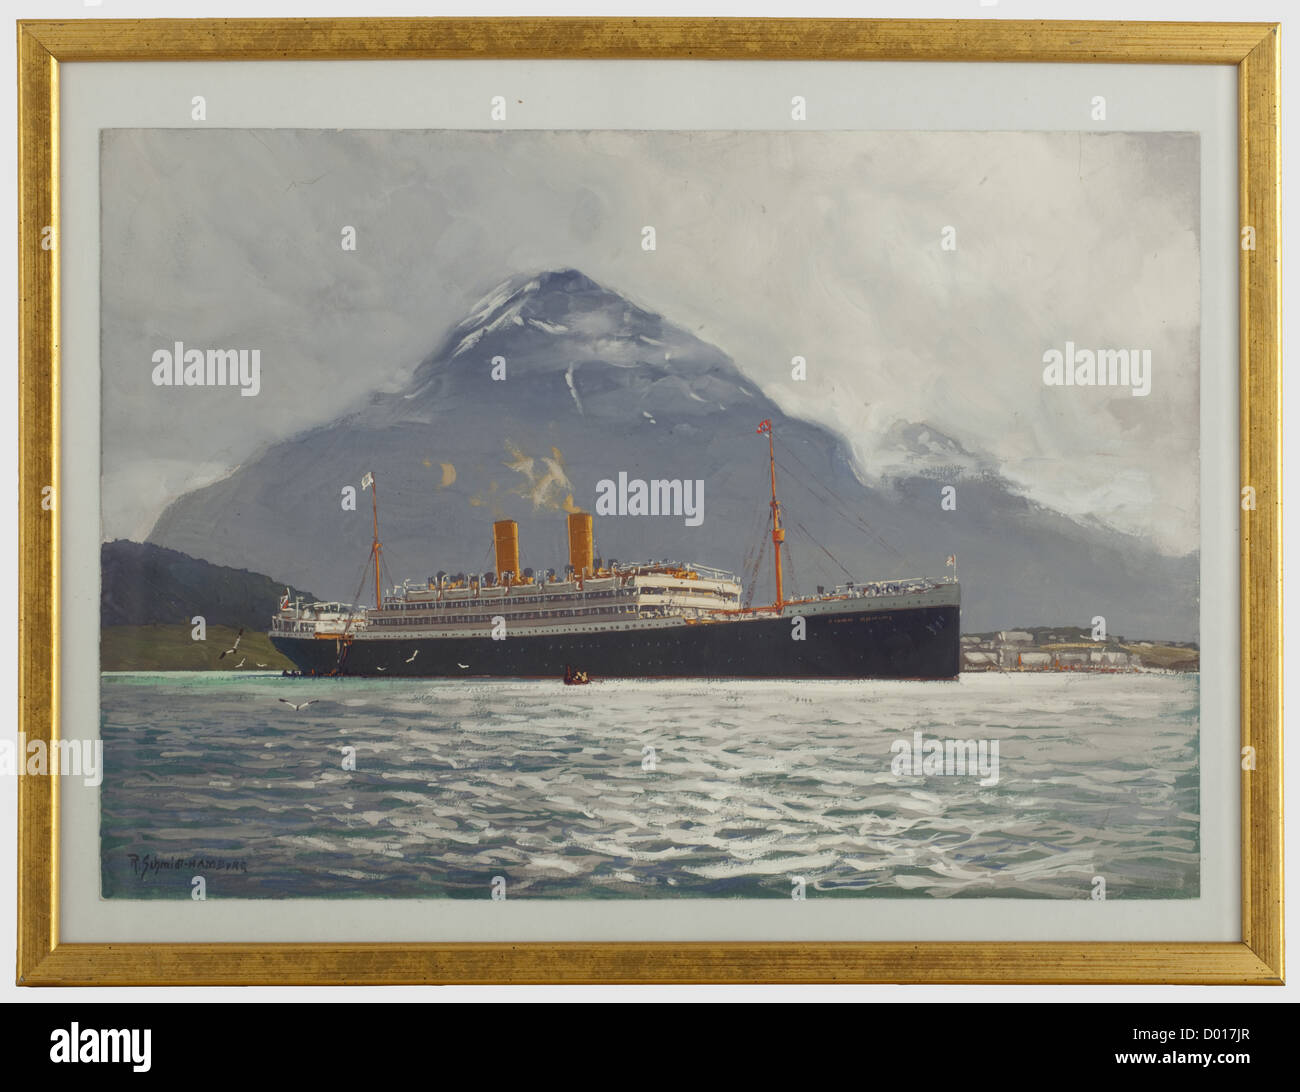 Robert Schmidt-Hamburg(1885 - 1963)- The National Mail Steamer 'Großer Kurfürst' Sailing to Scandinavia,Mixed technique on cardboard,signed 'R. Schmidt-Hamburg' at the lower left. Finely painted view of the anchoring steamer in front of a mountain obscured by clouds. In a new,gilded frame under glass. 32 x 42 cm. Robert Schmidt-Hamburg,along with Willy Stöwer and Hans Bohrdt,was one of the best-known German maritime painters,historic,historical,20th century,transport,transportation,object,objects,stills,painting,paintings,fine arts,art,illus,Additional-Rights-Clearences-Not Available Stock Photo